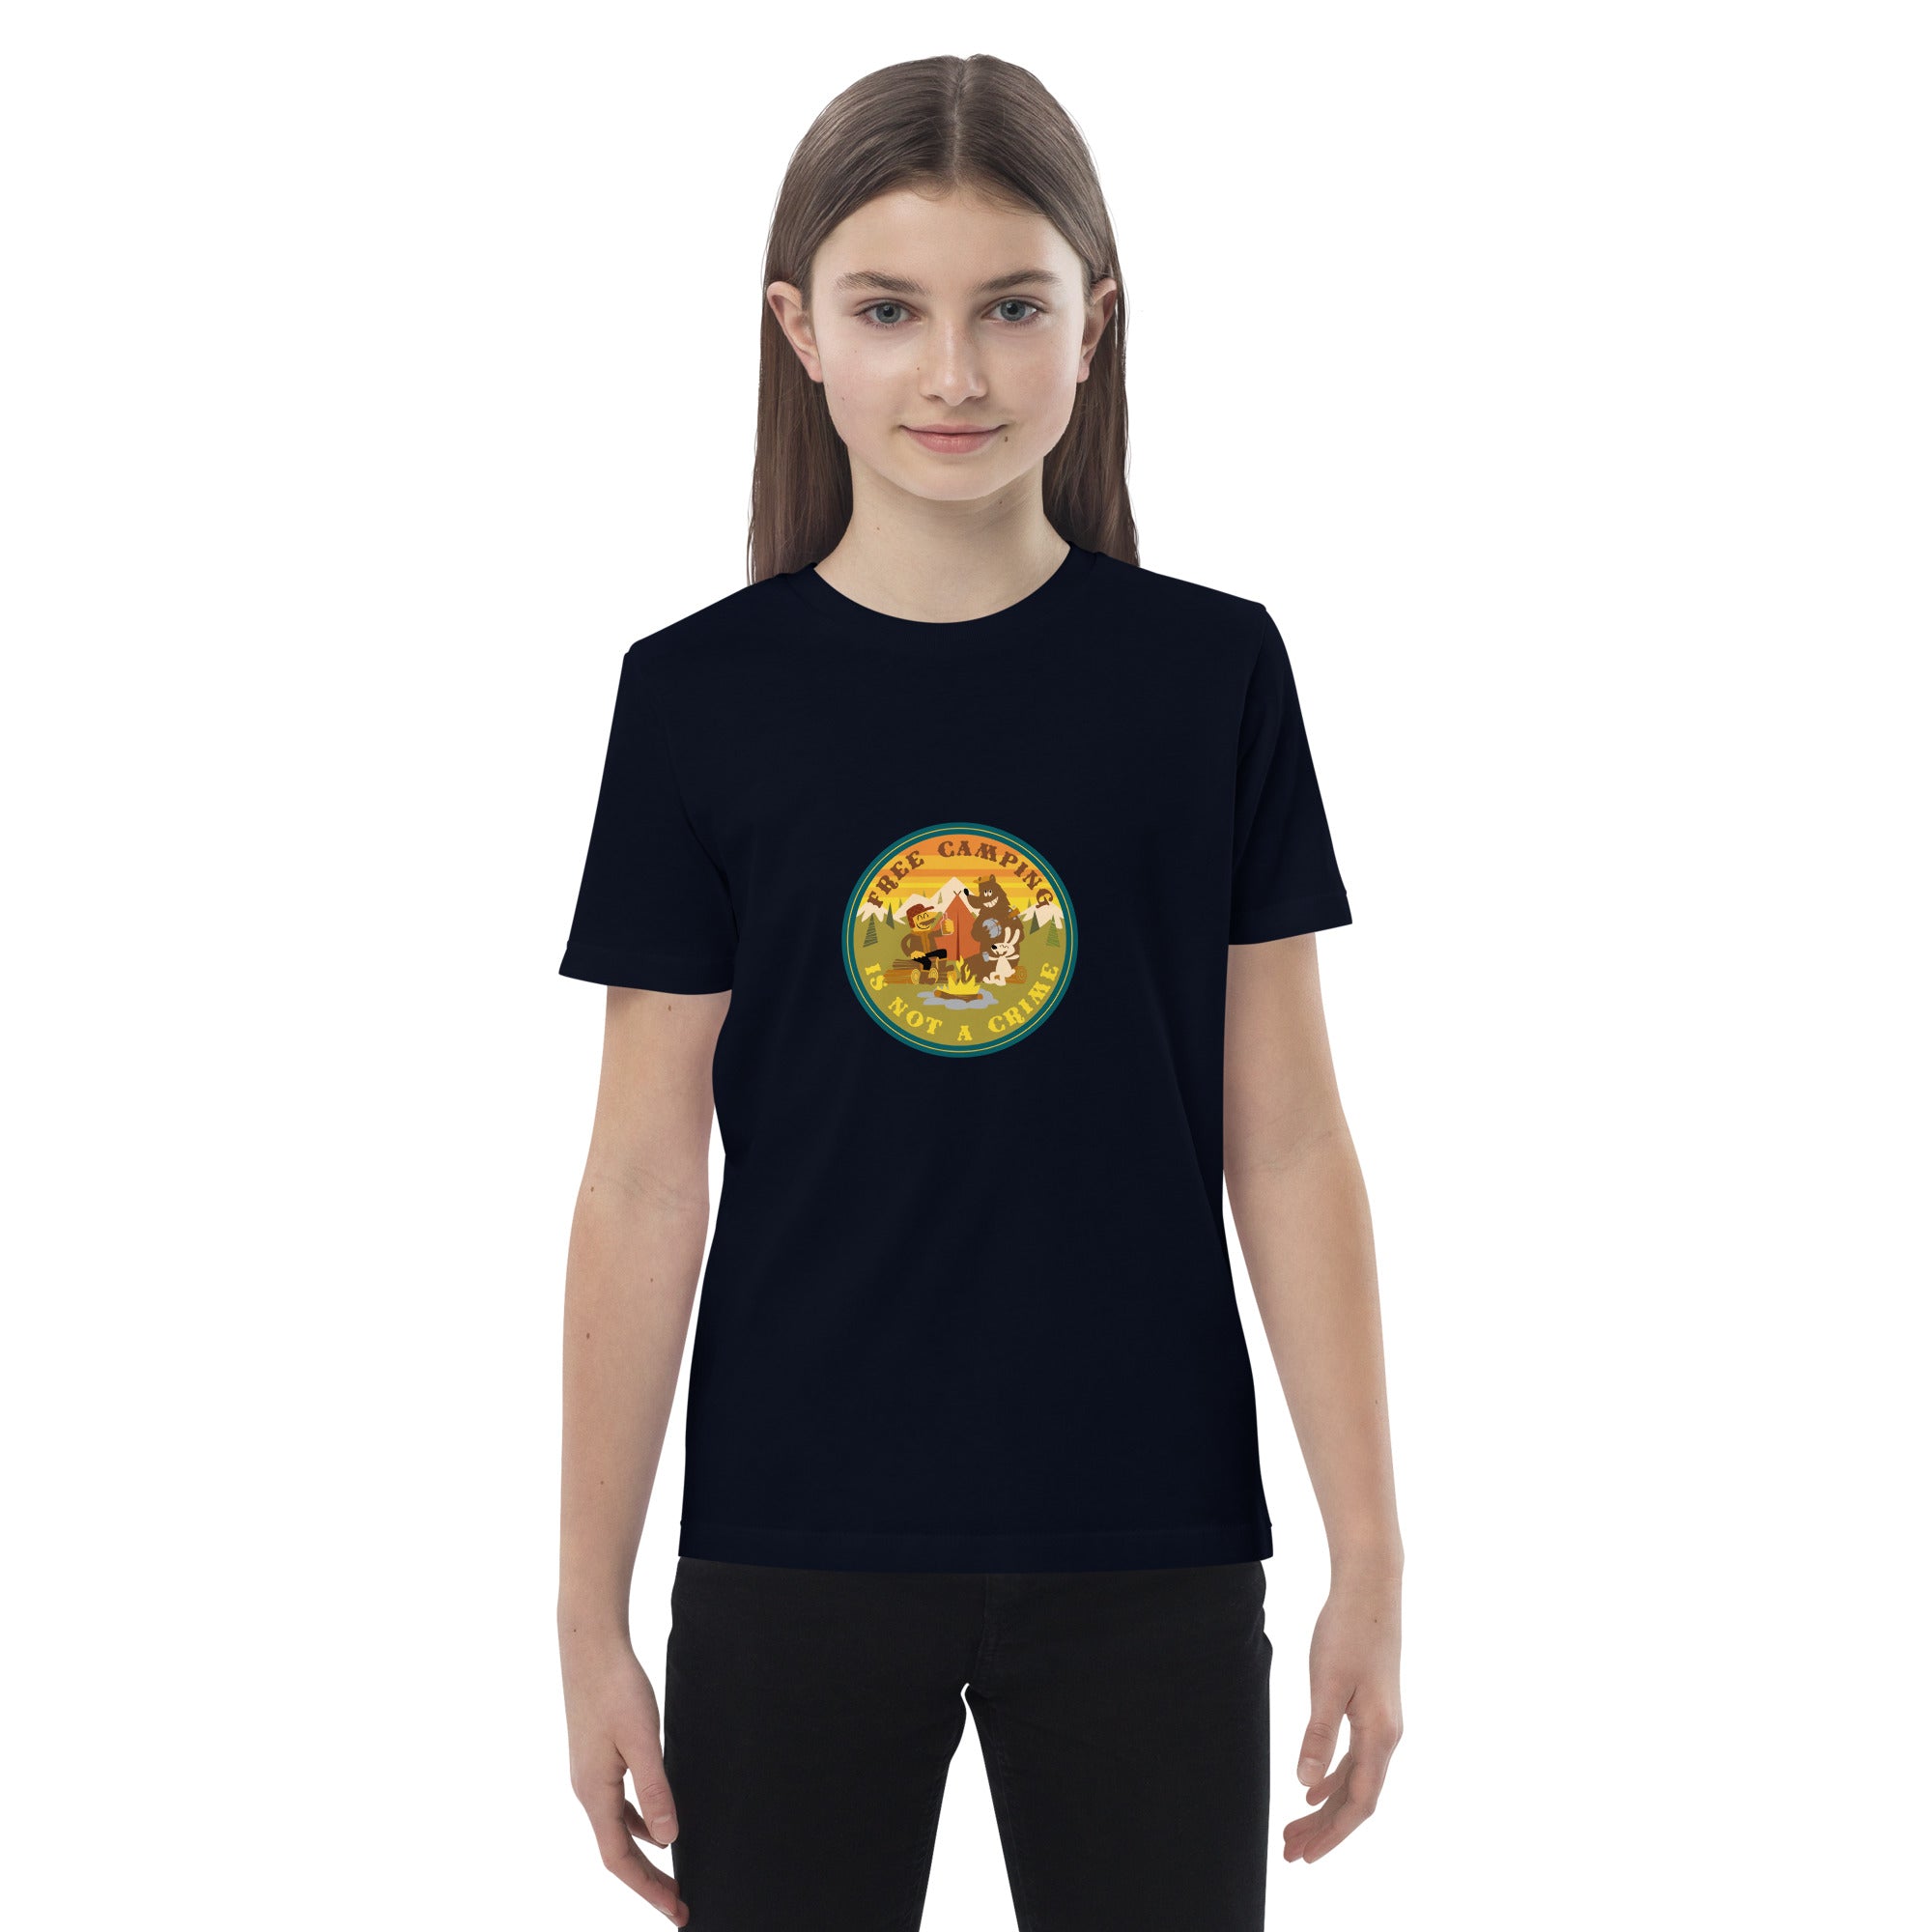 Organic cotton kids t-shirt Free Camping is not a crime